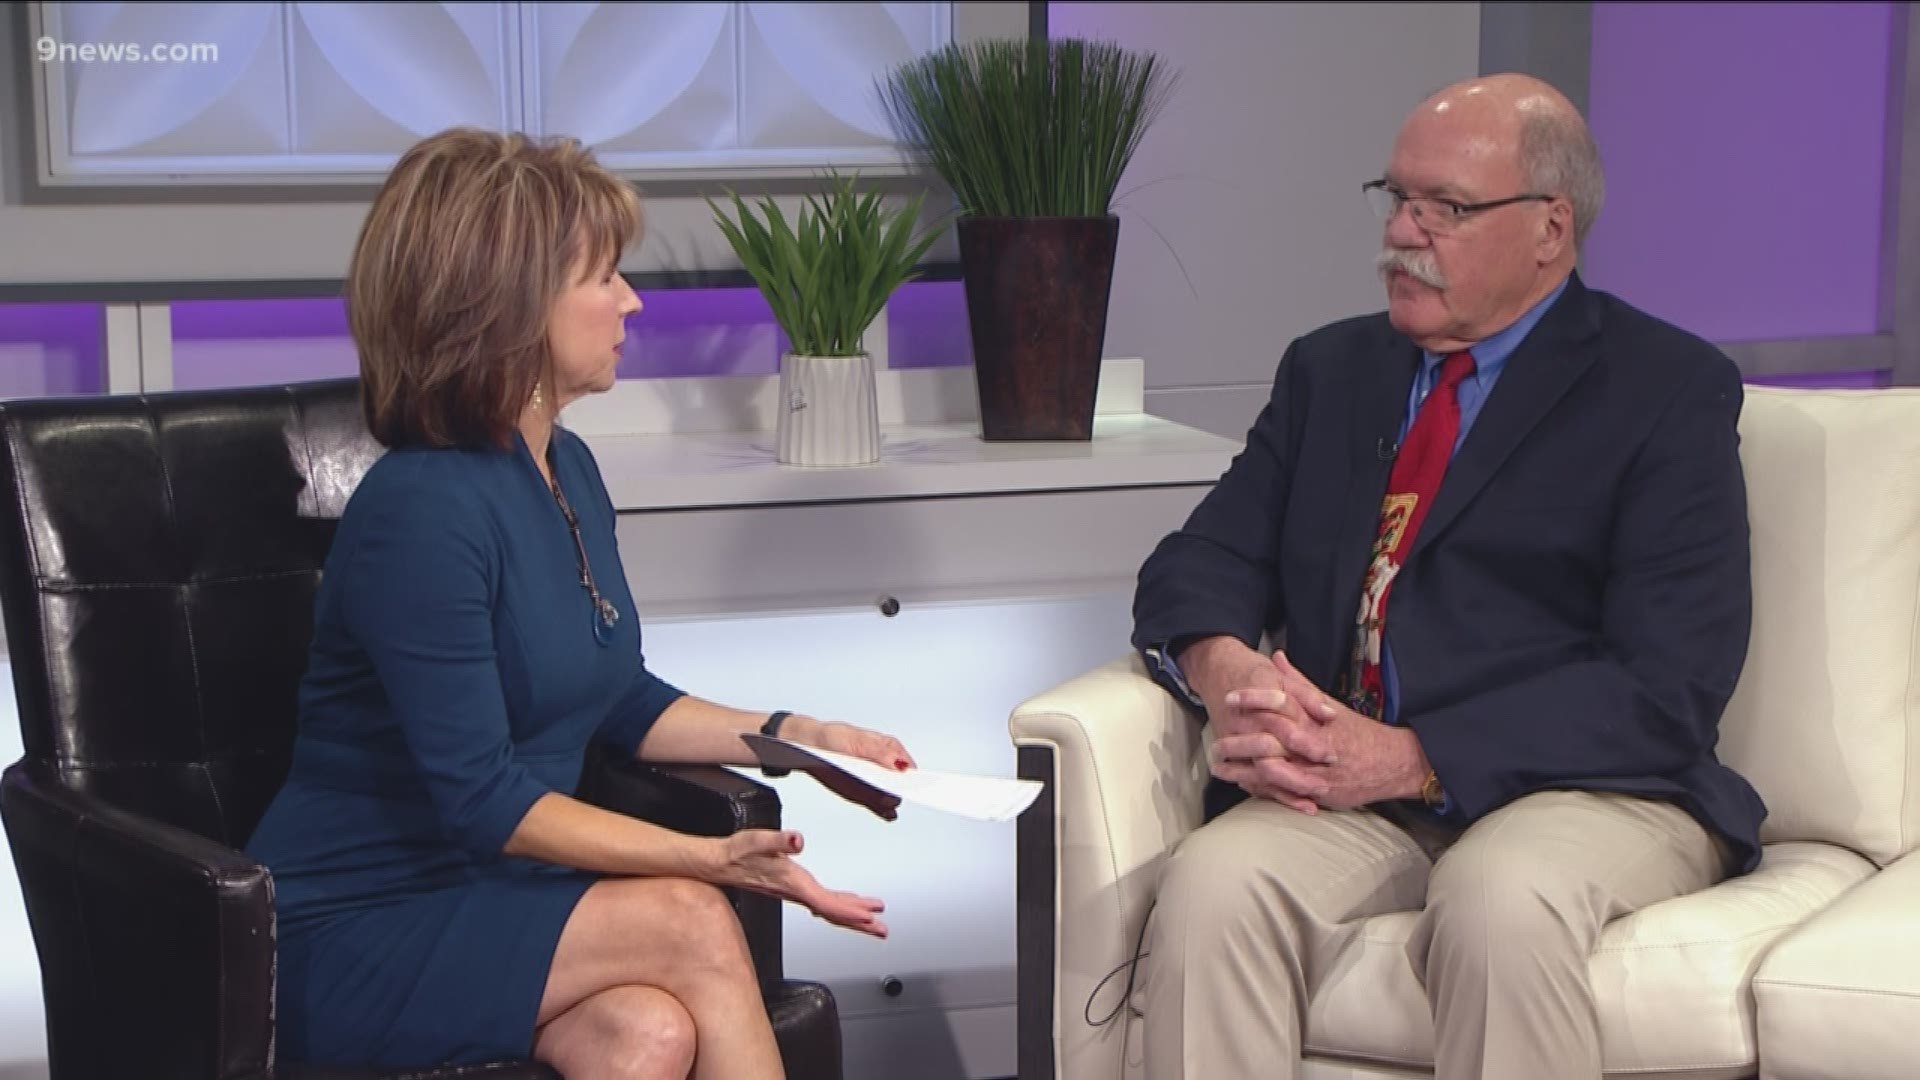 Dr. Gordon Ehlers from Swedish Family Medicine Center talks about measles, what symptoms to look out for and advice for those who were at DIA last week.